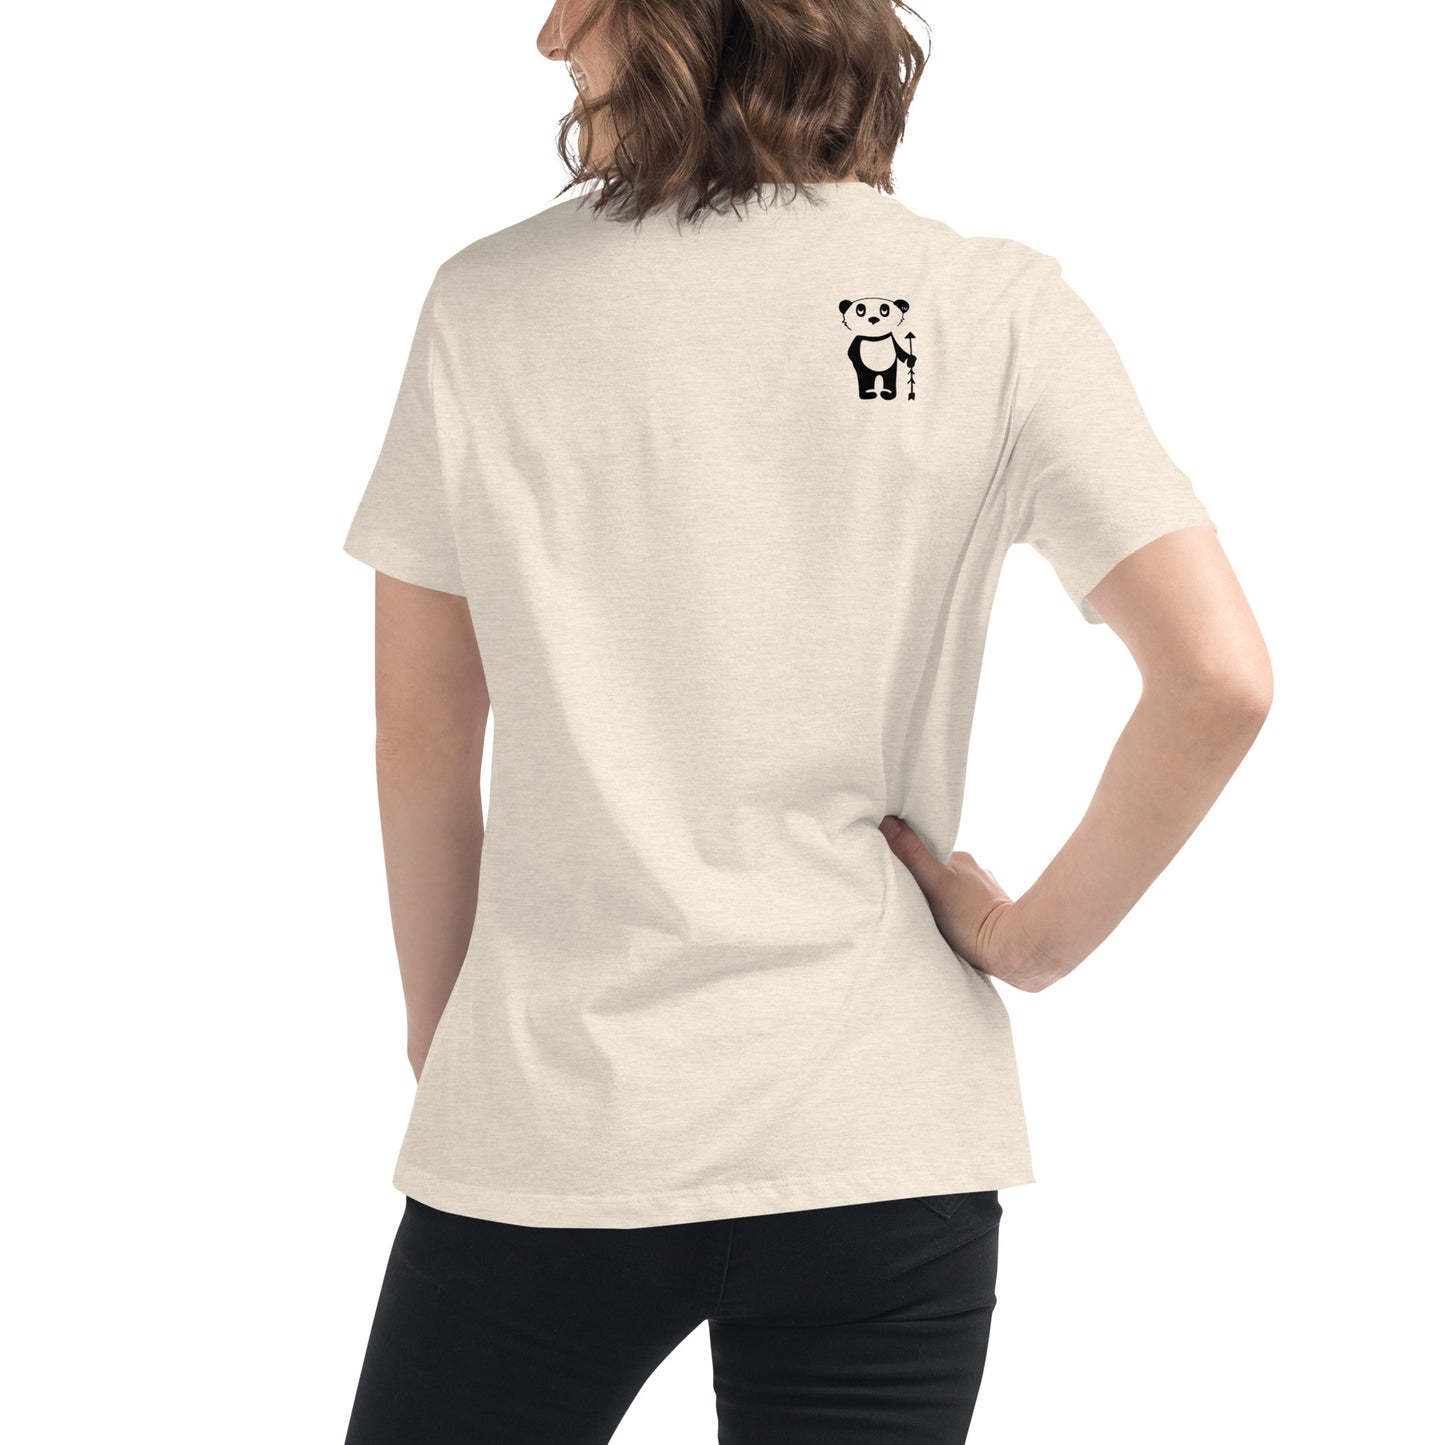 "Nothing Serious is going on Here" Feels Like Fun "Nothing Serious is going on Here". Feels Like Fun® Women's Relaxed T-Shirt